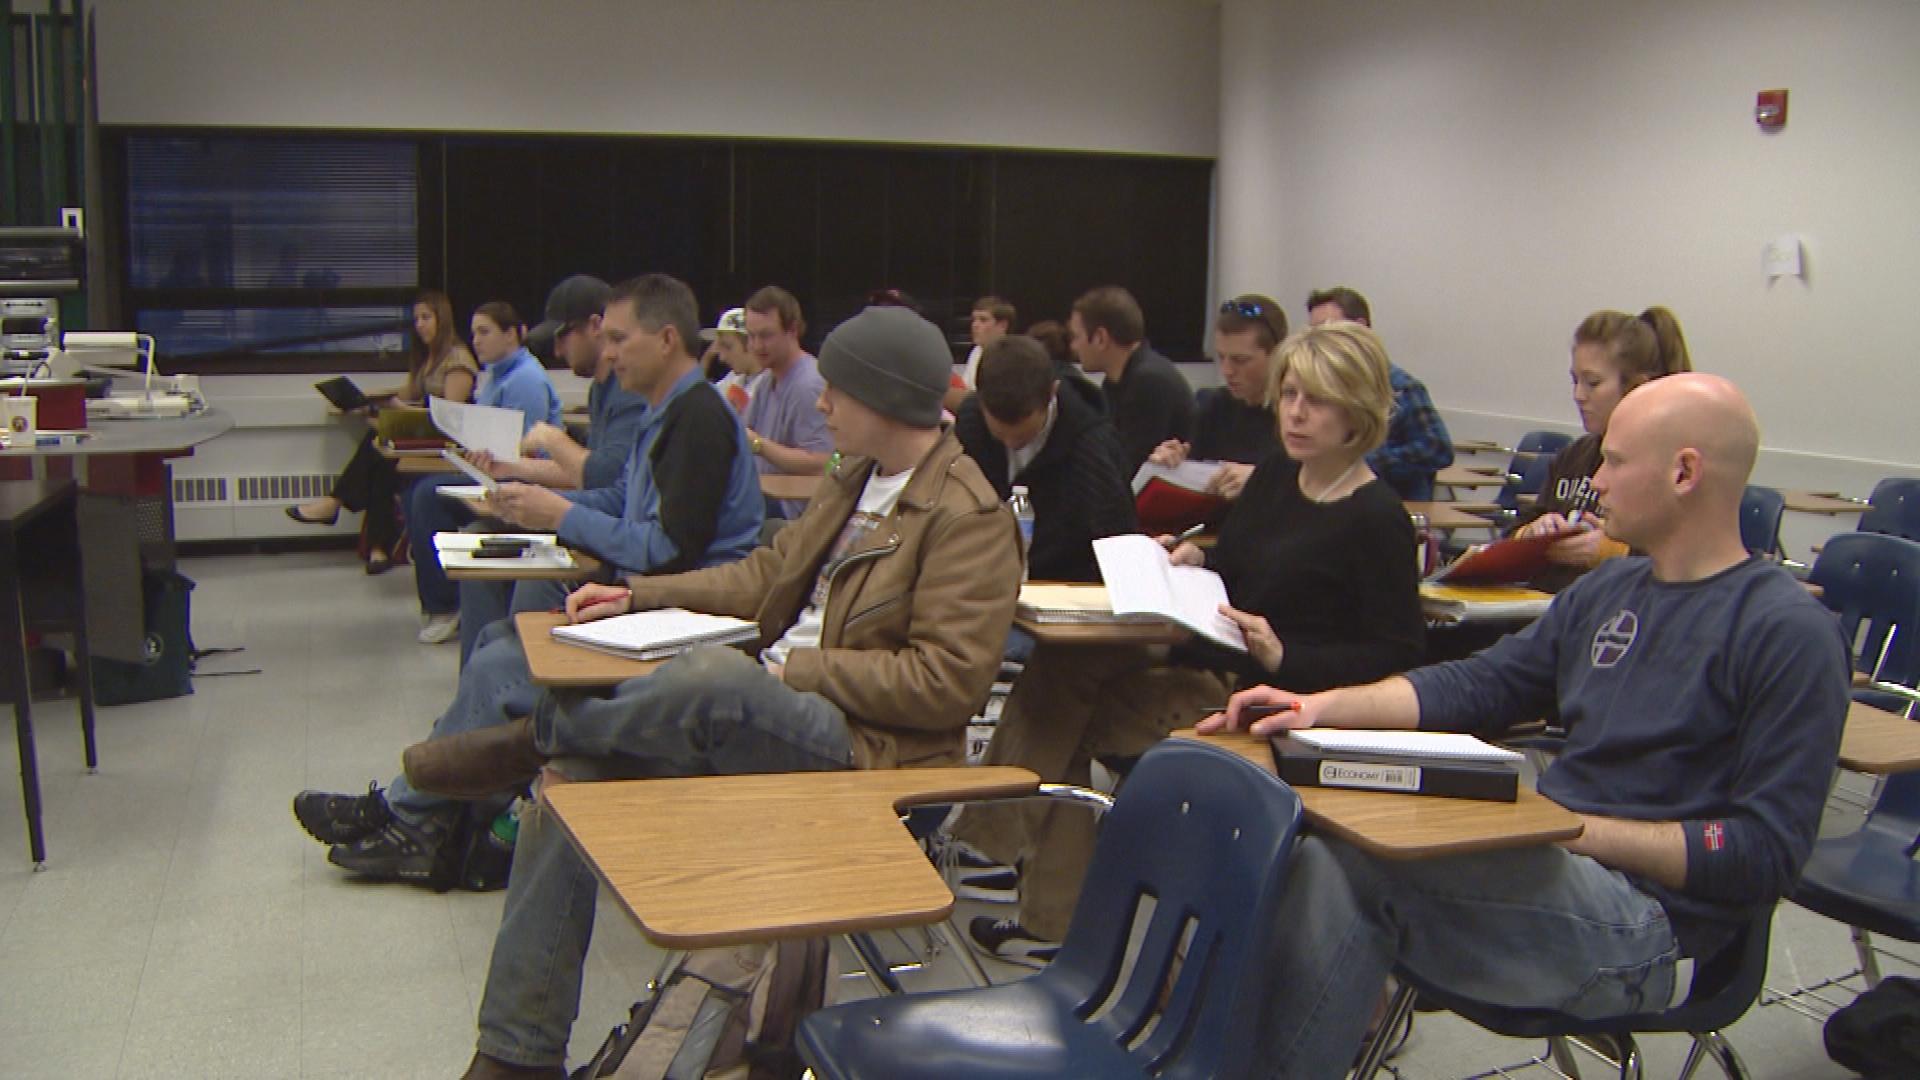 A class at Metro State University (credit: CBS)